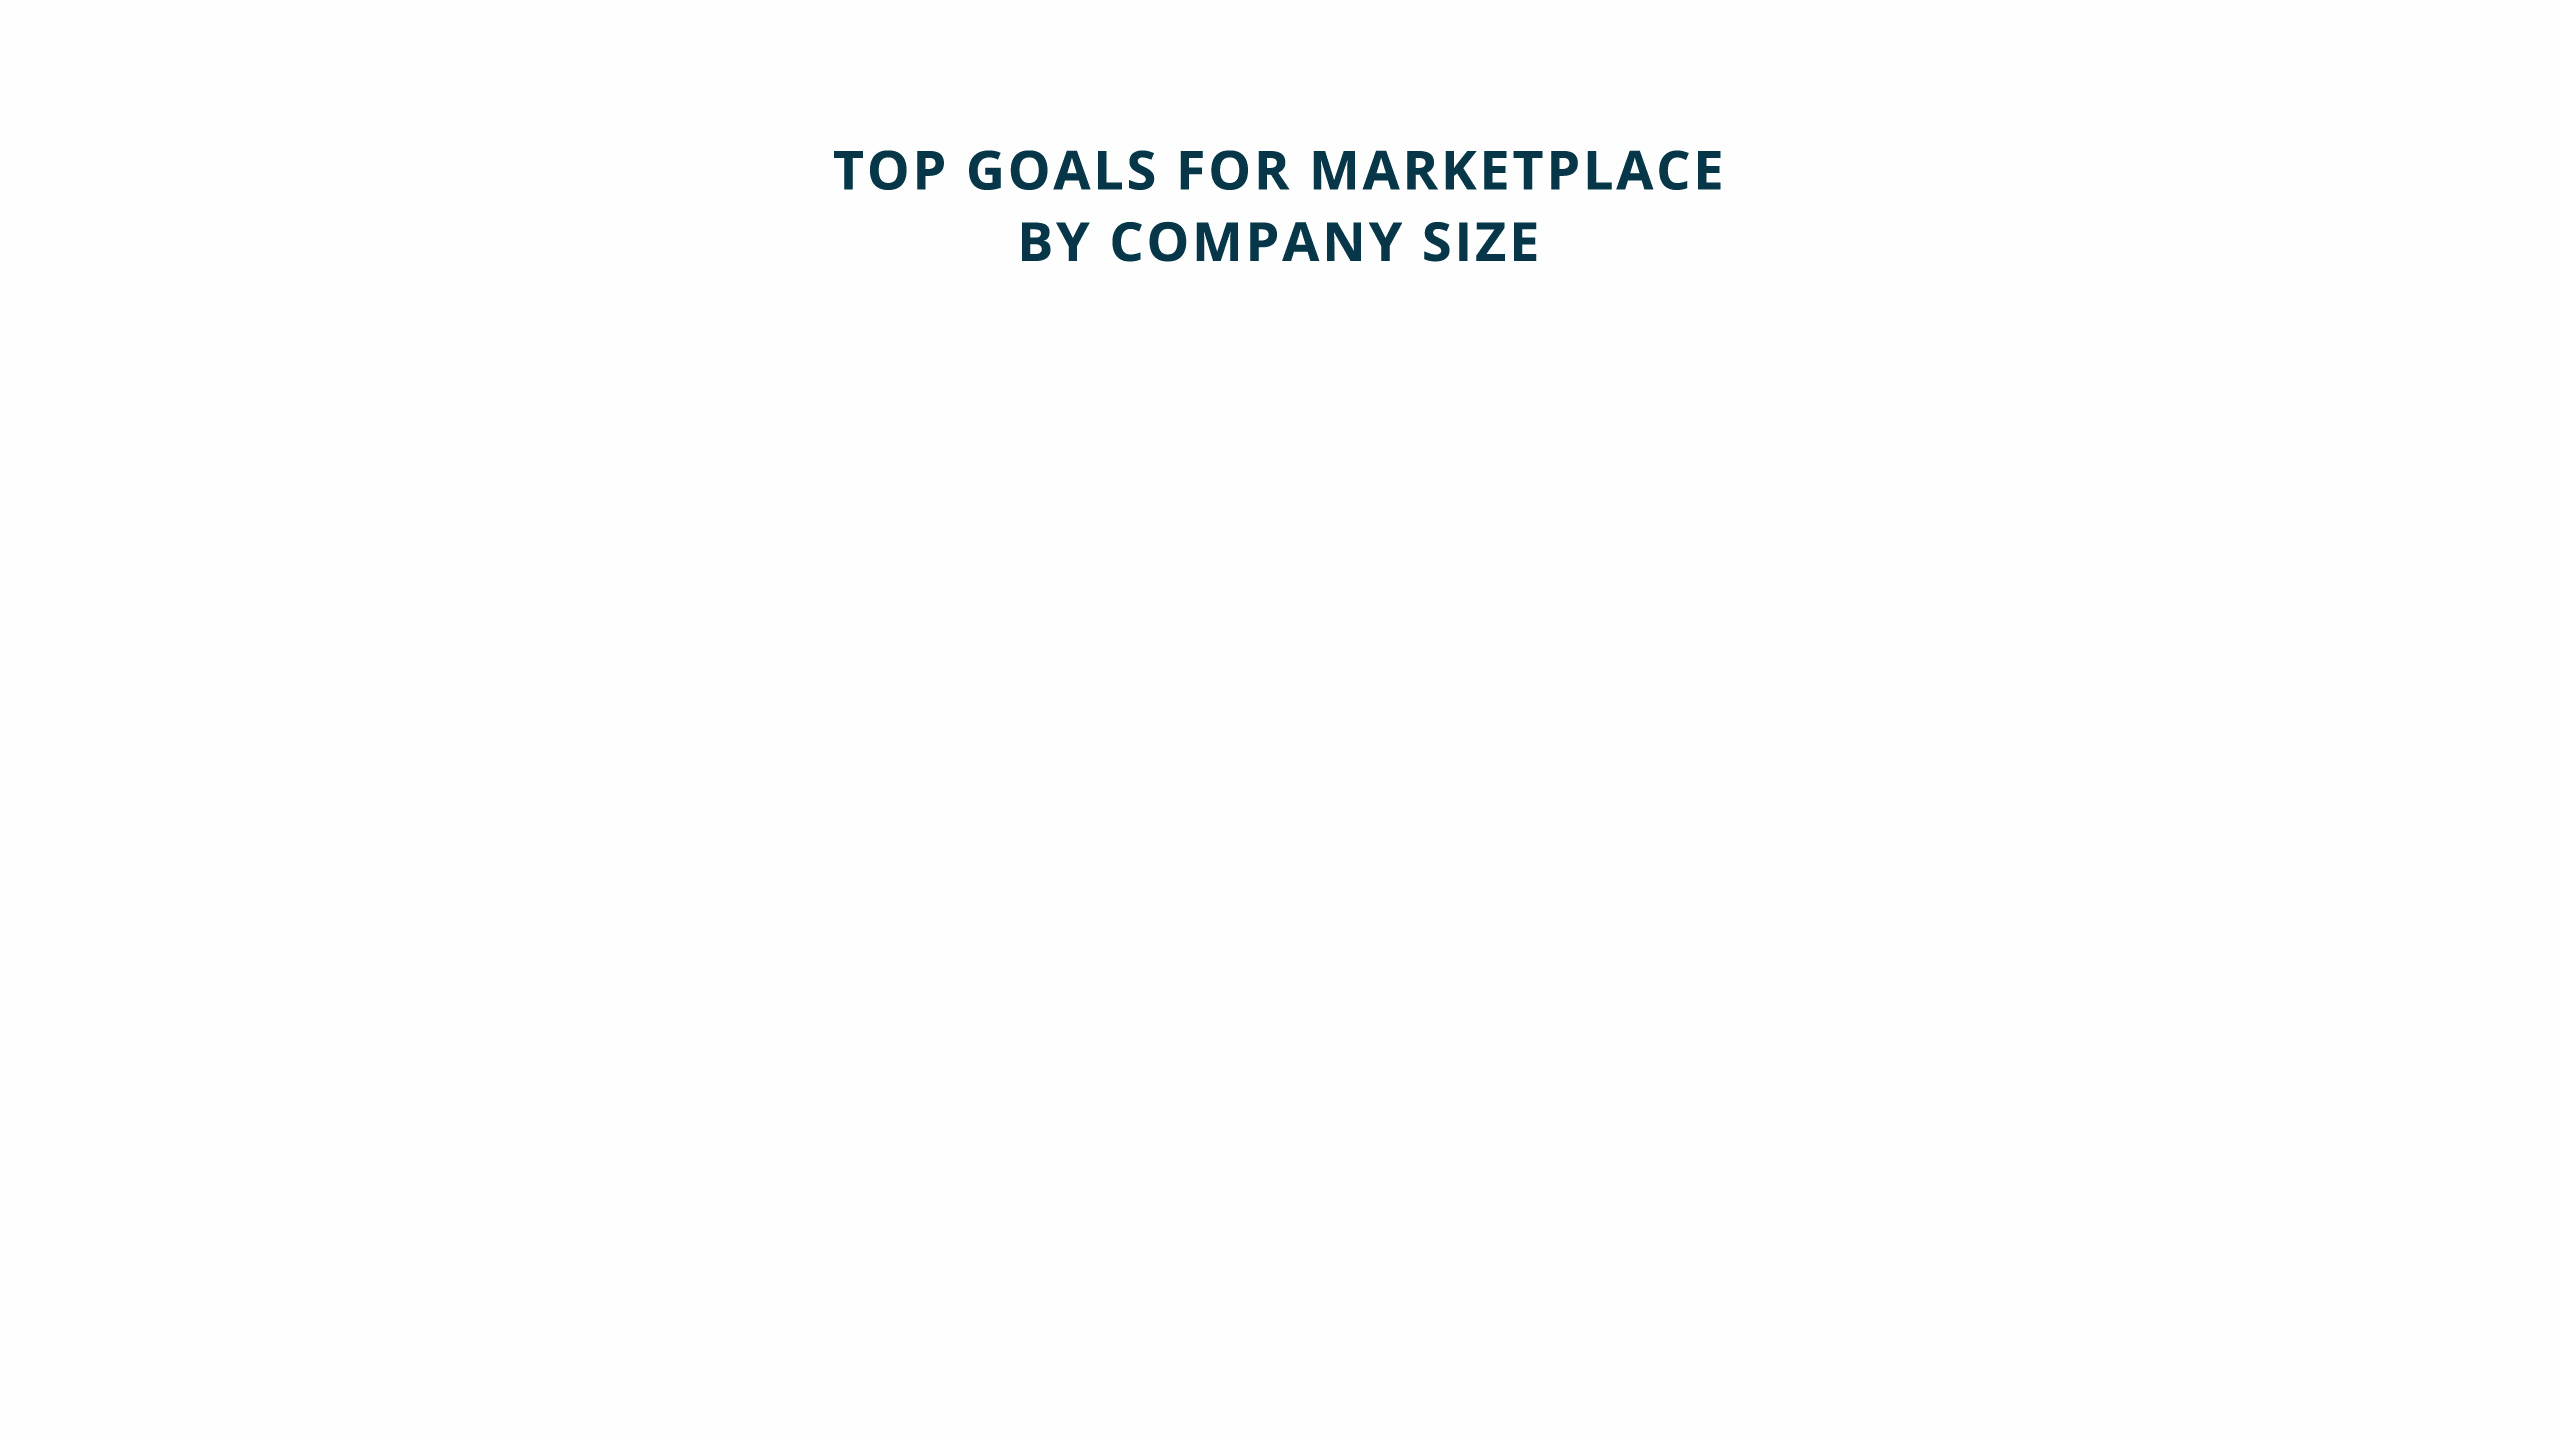 Top goals for marketplace by company size